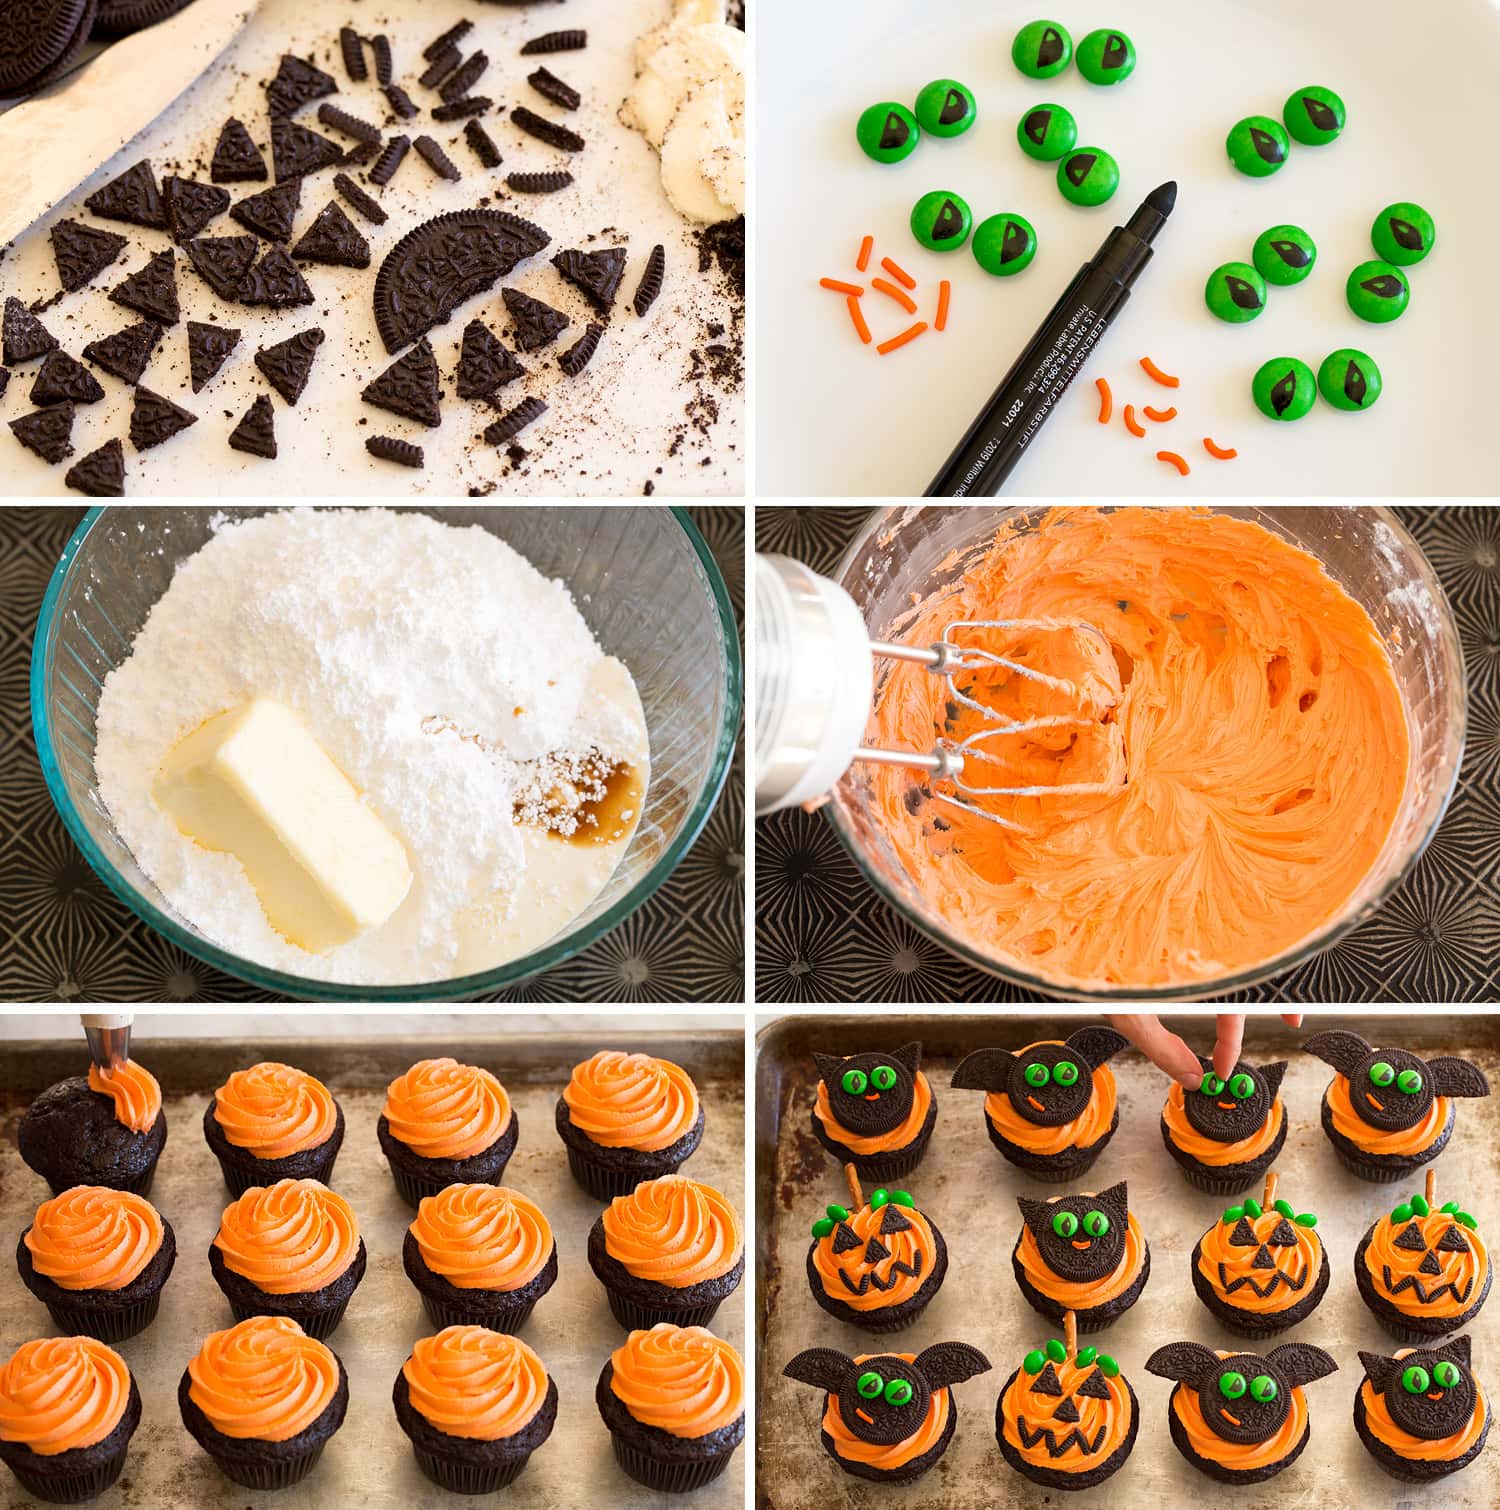 Steps of making oreo and mm decoration for cupcakes, frosting and decorating.